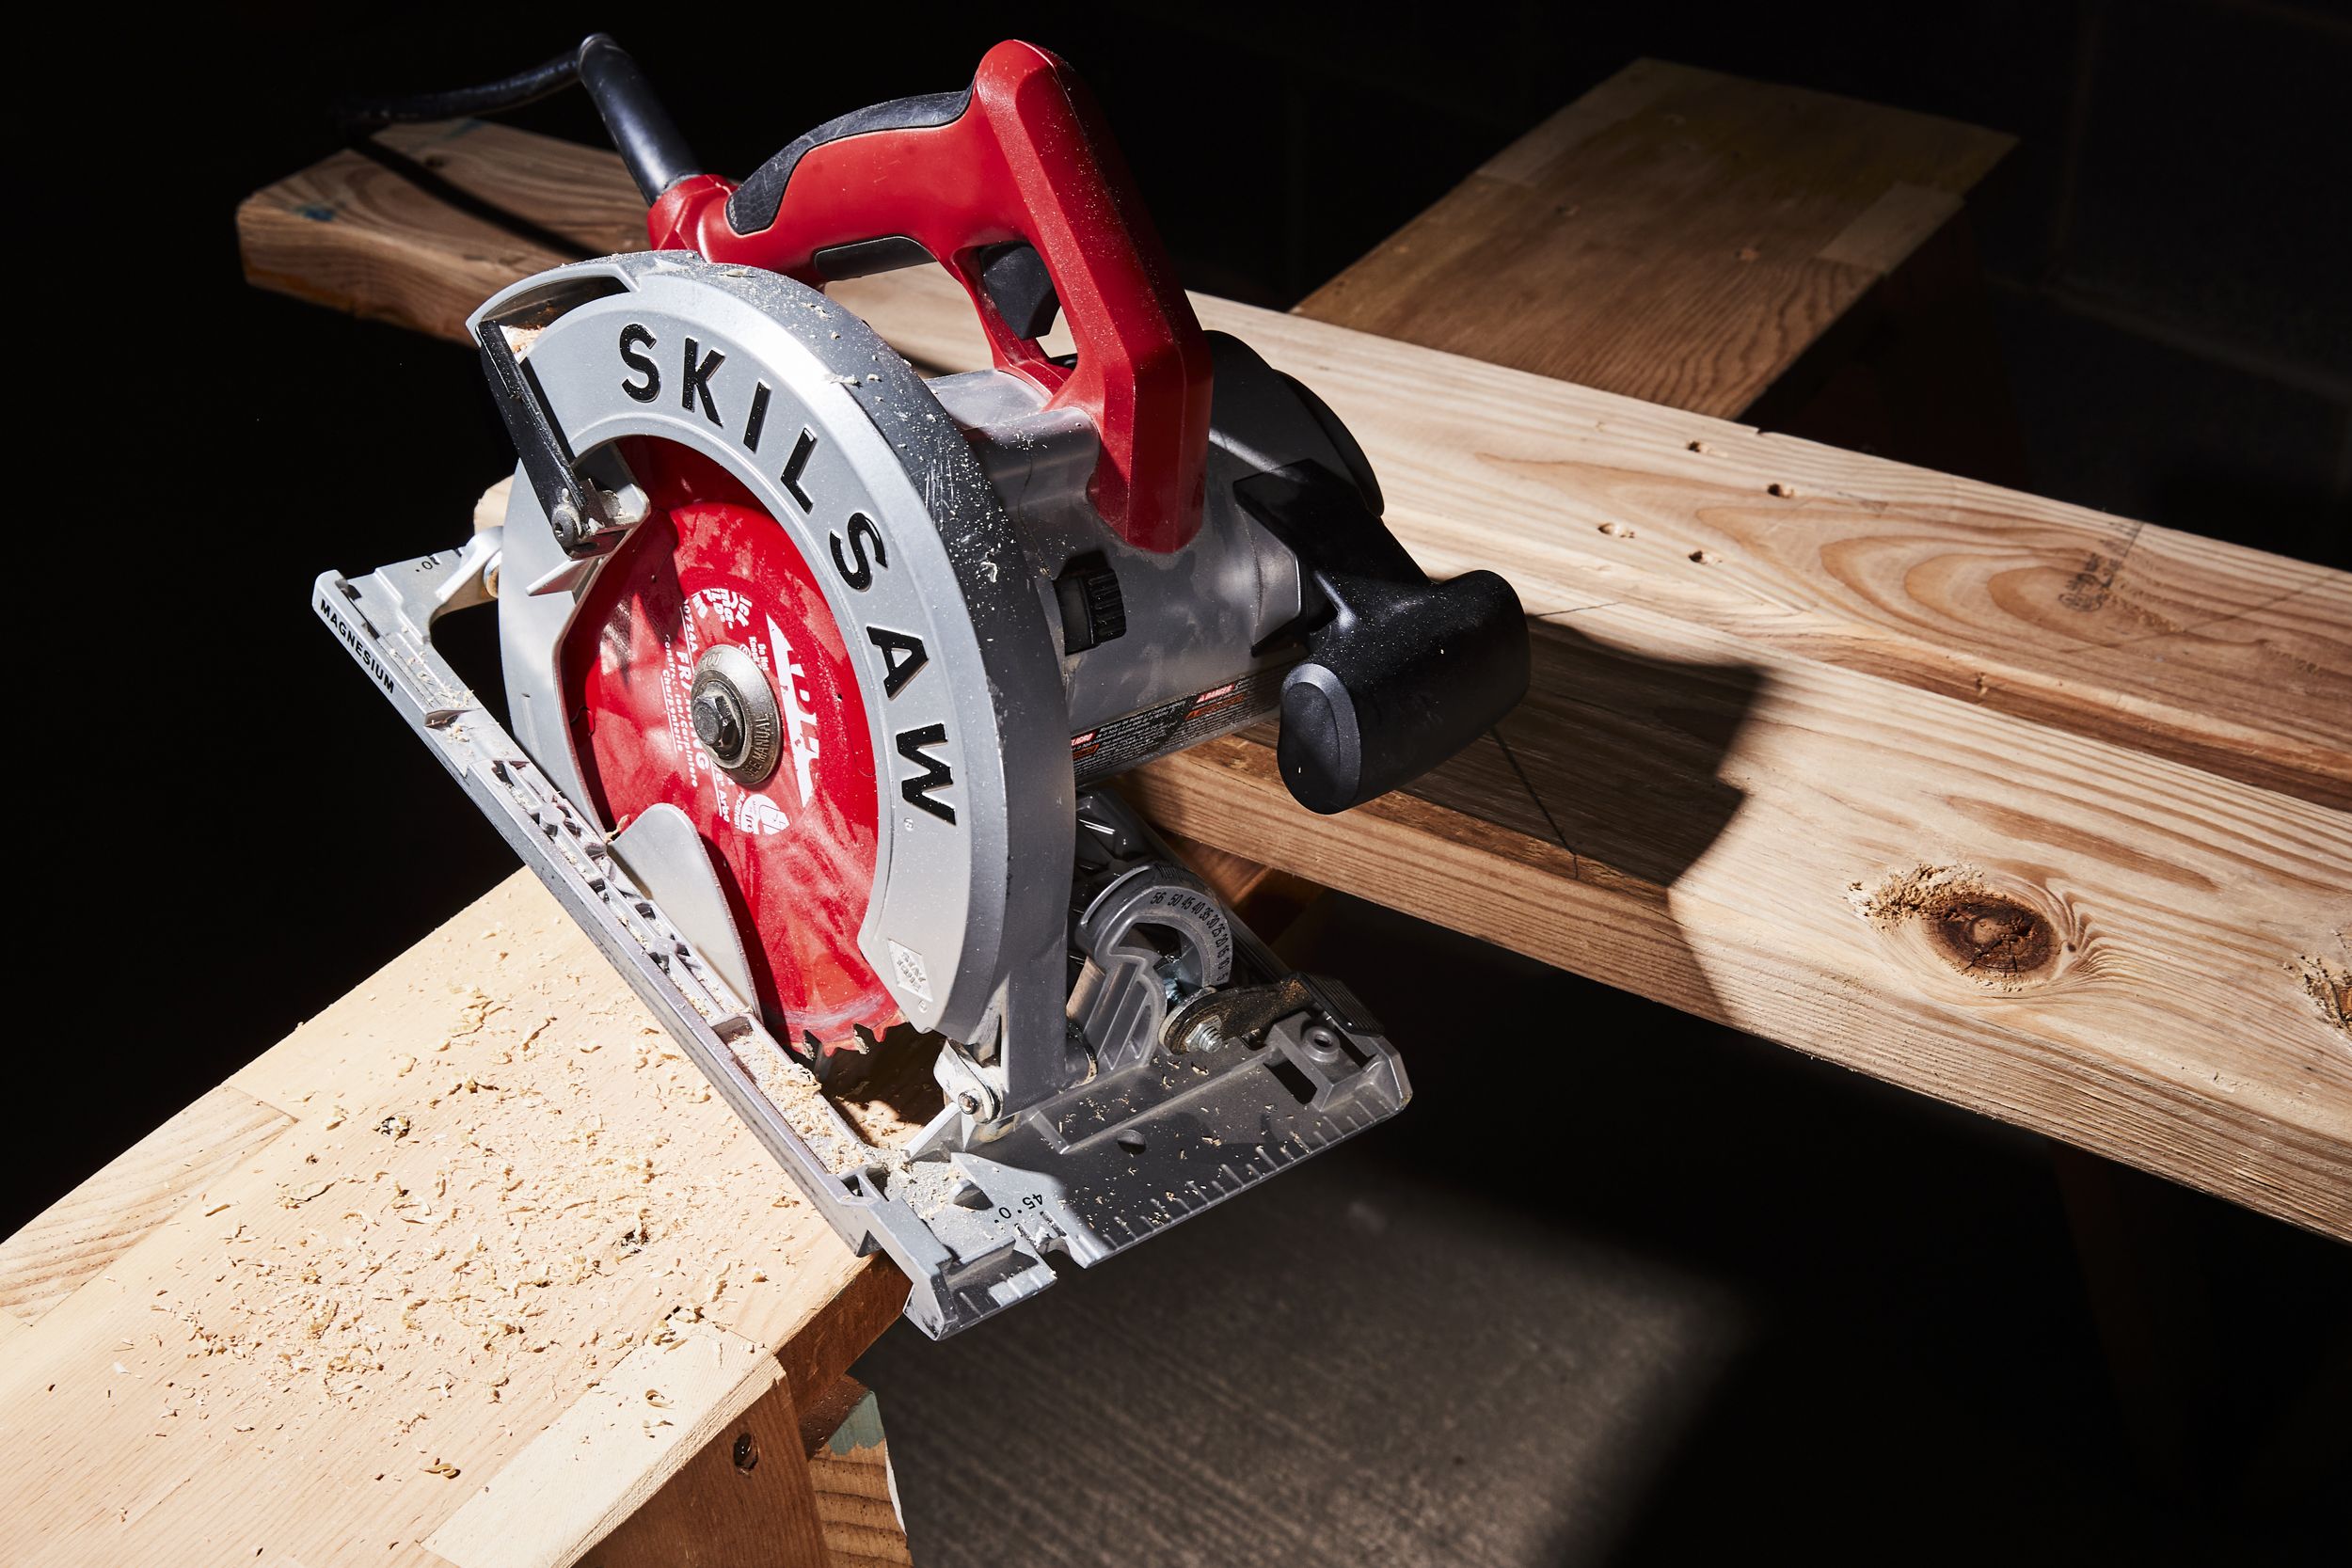 How to Compare the Performance of Cordless Circular Saws for Woodworking?